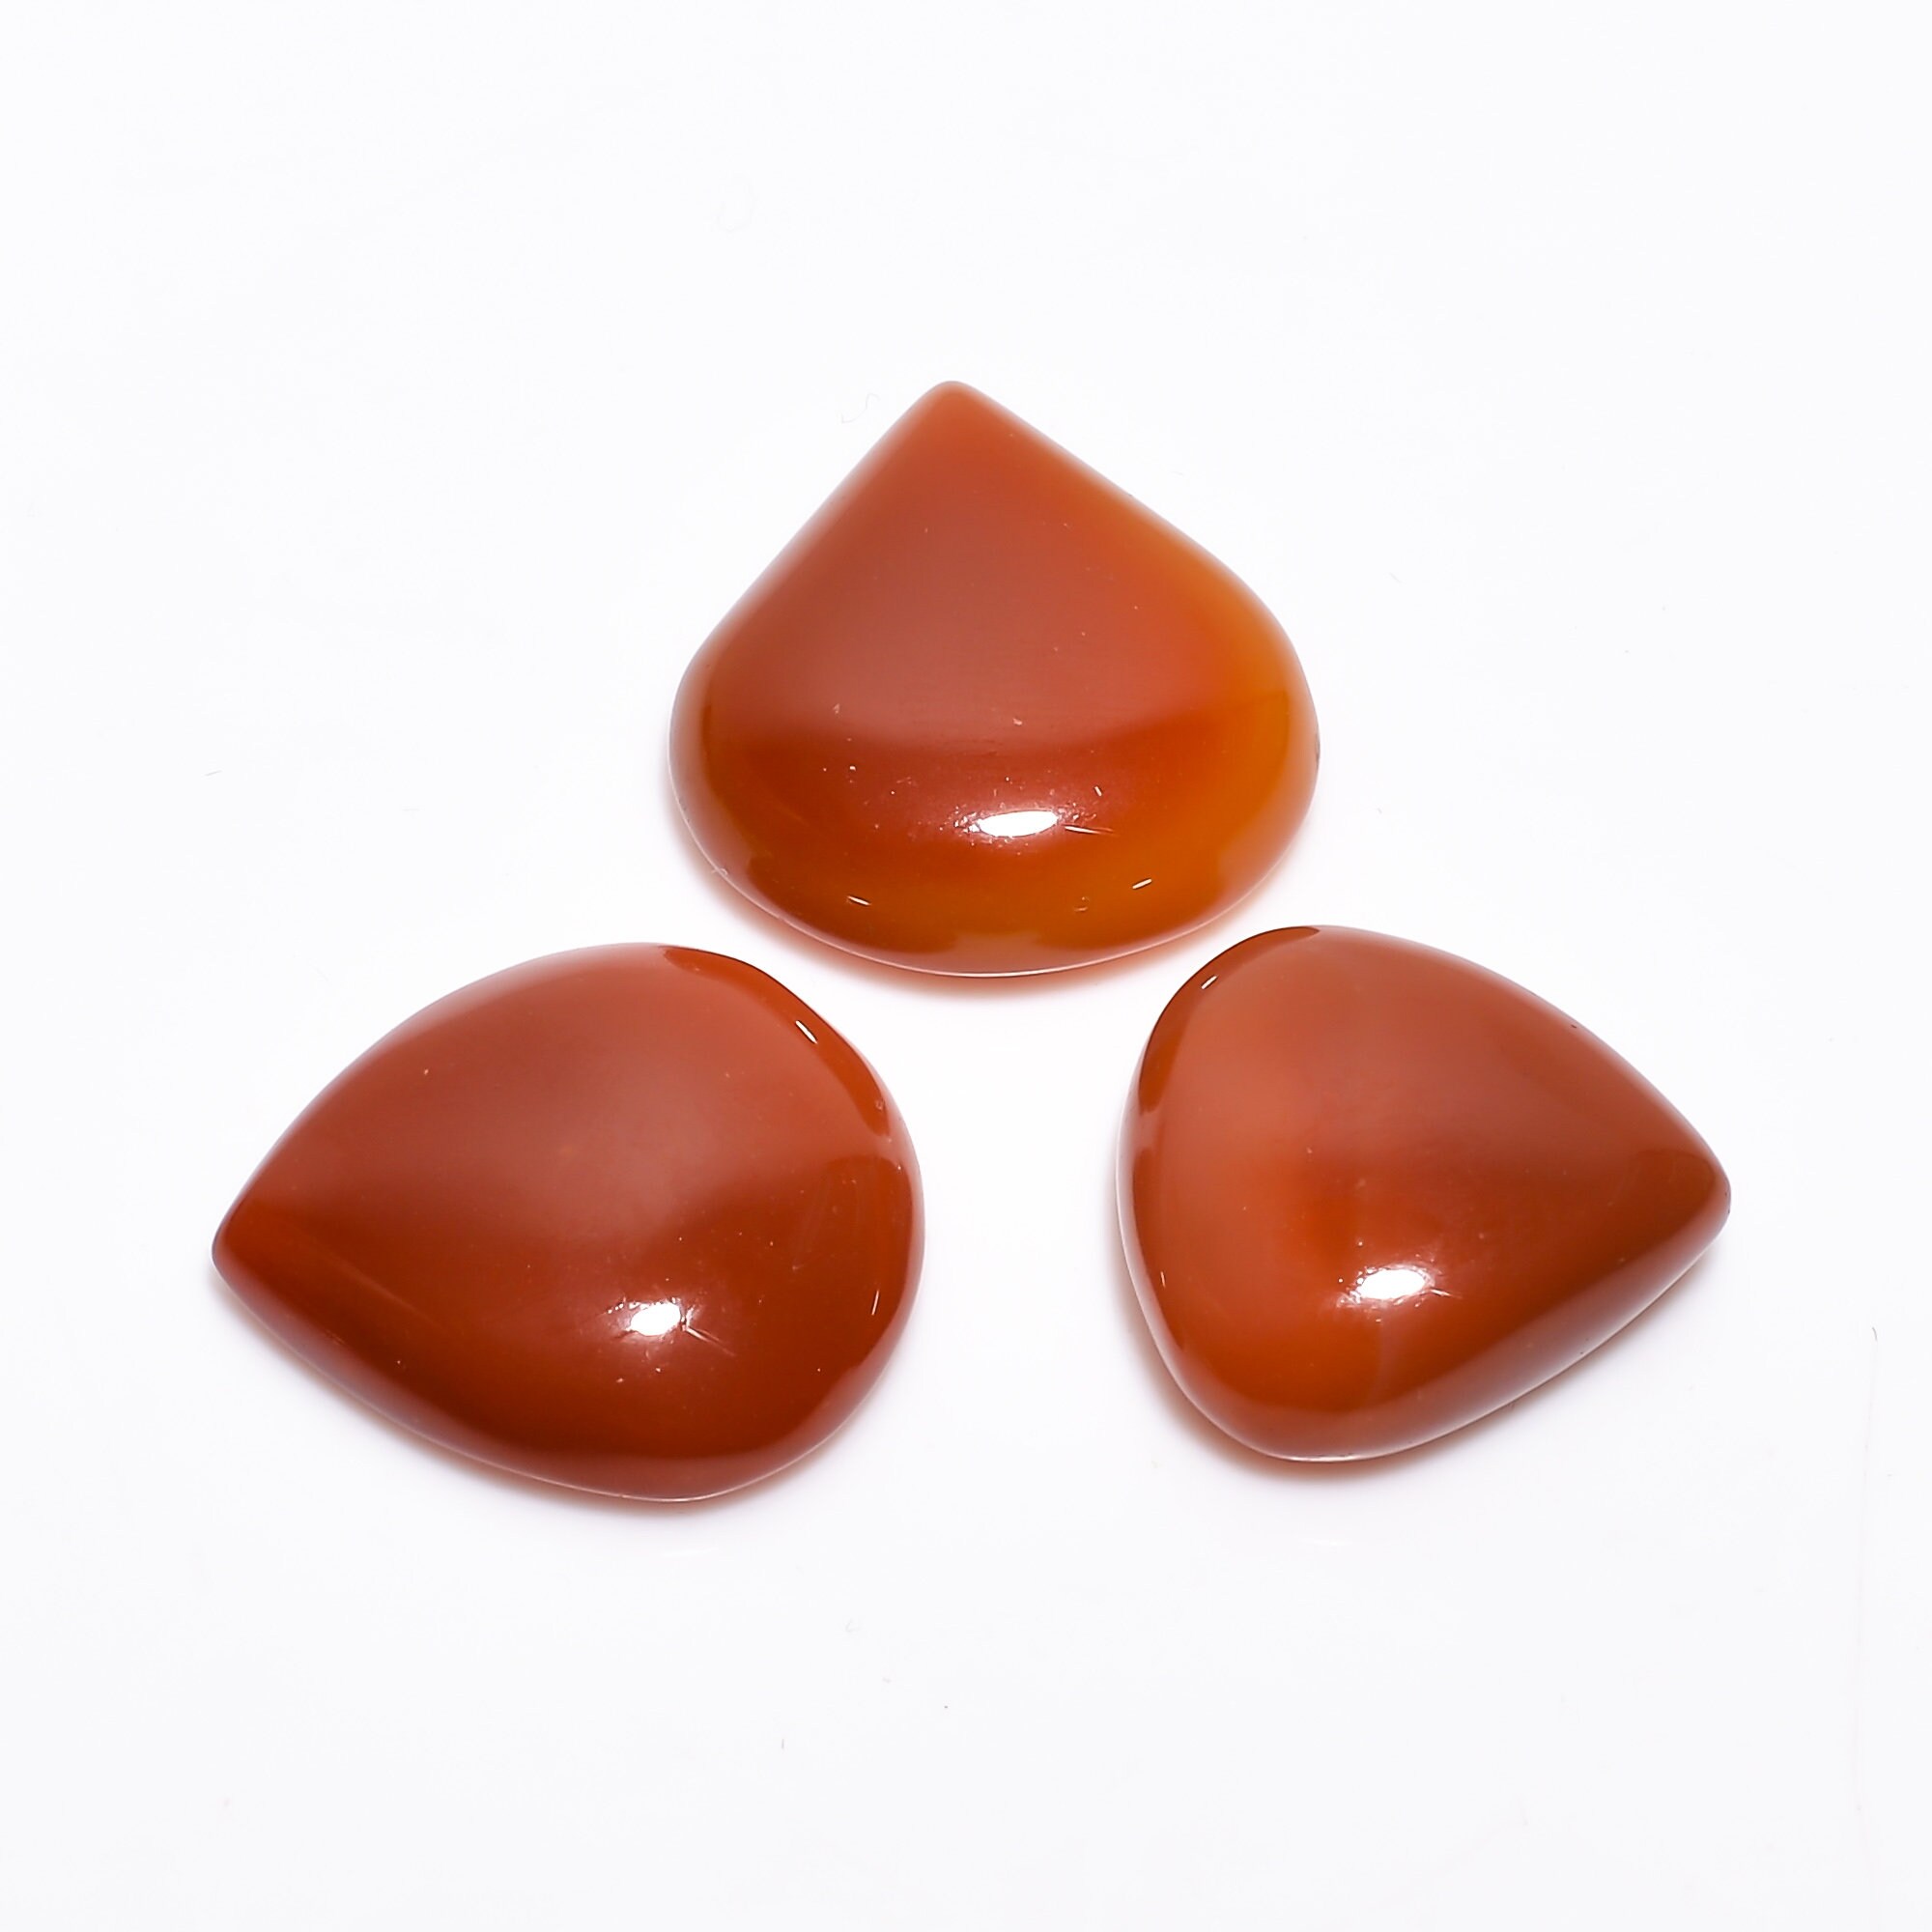 Excellent Top Grade Quality 100% Natural Carnelian Heart Shape Cabochon Loose Gemstone 3 Pcs For Making Earrings 64 Ct 20X19 23X21 mm GA-383